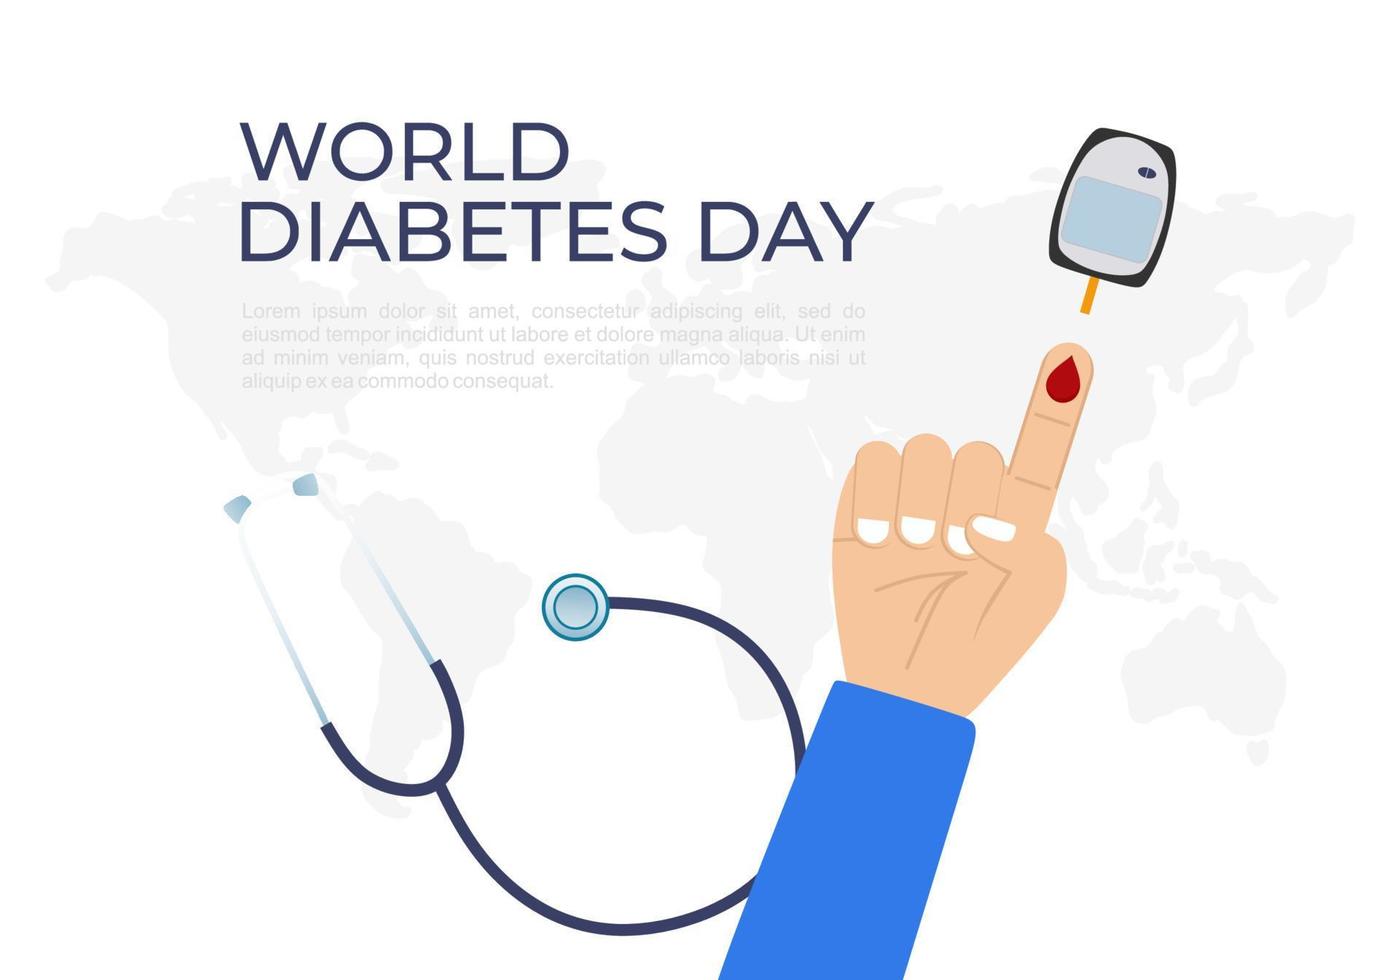 World diabetes day background with blood sugar measuring device vector